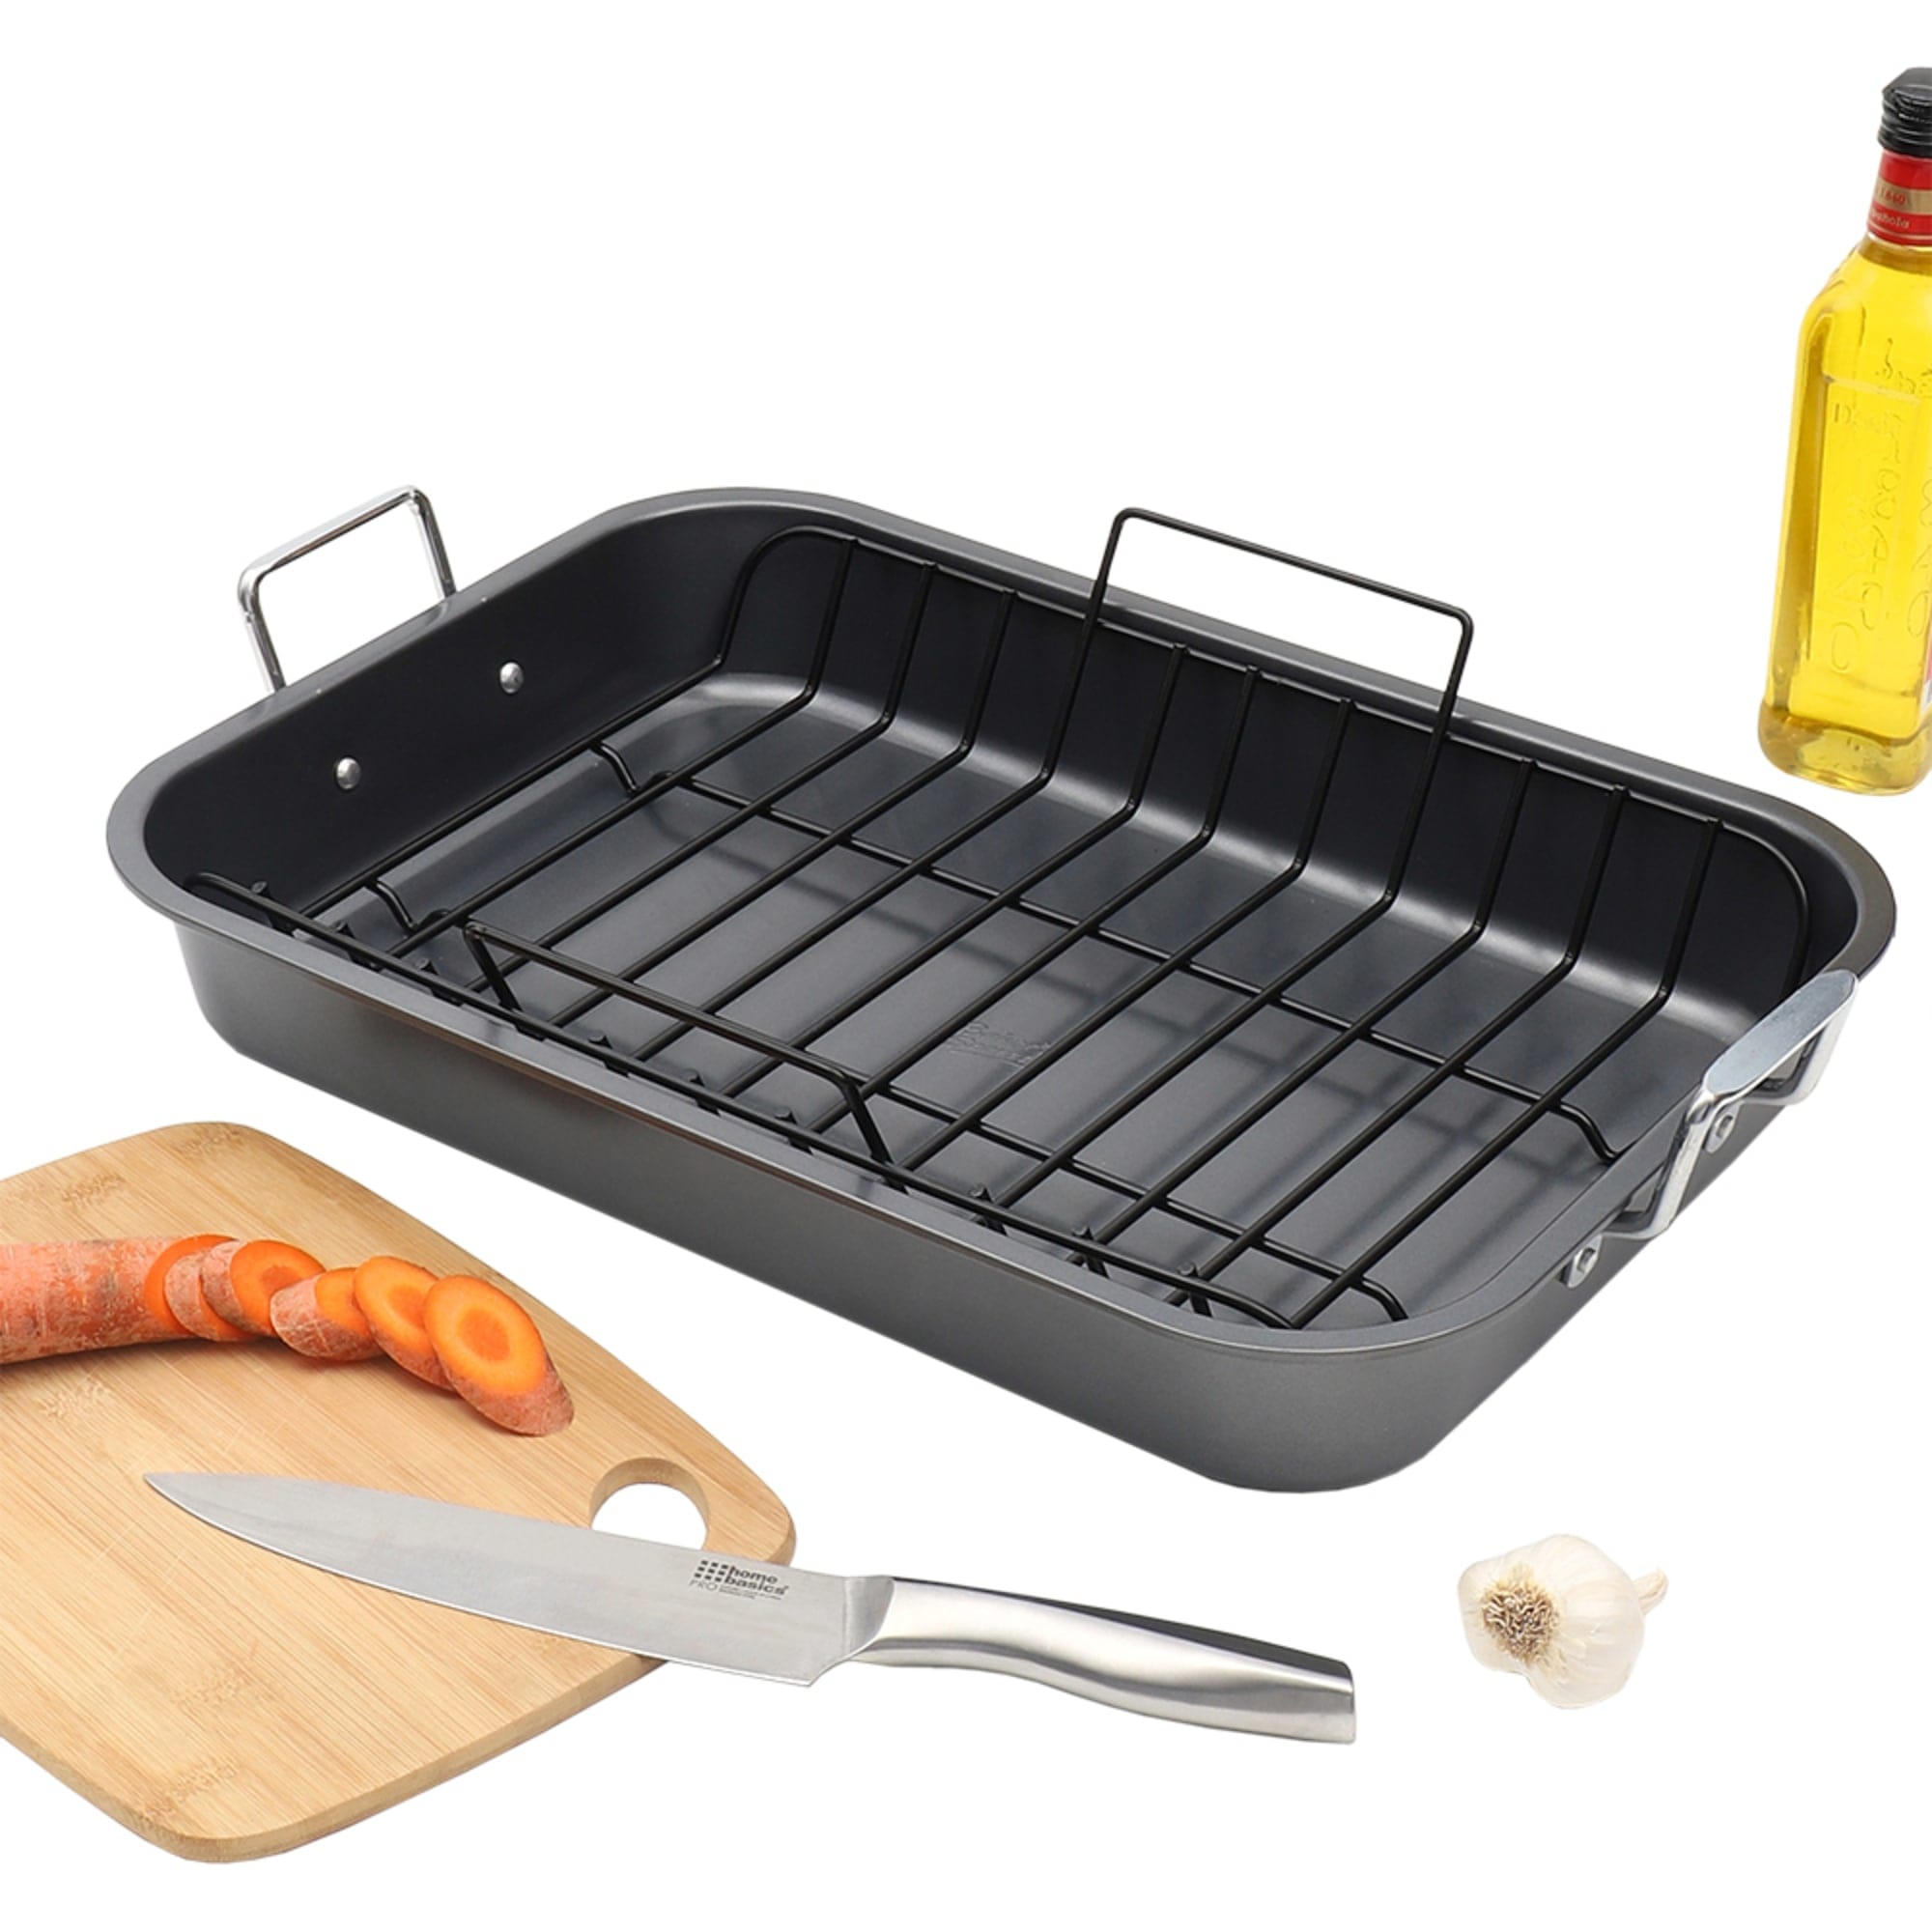 Baker’s Secret Enhanced 20-inch x 14-inch Non-Stick Steel Roaster Pan with Rack $20.00 EACH, CASE PACK OF 6